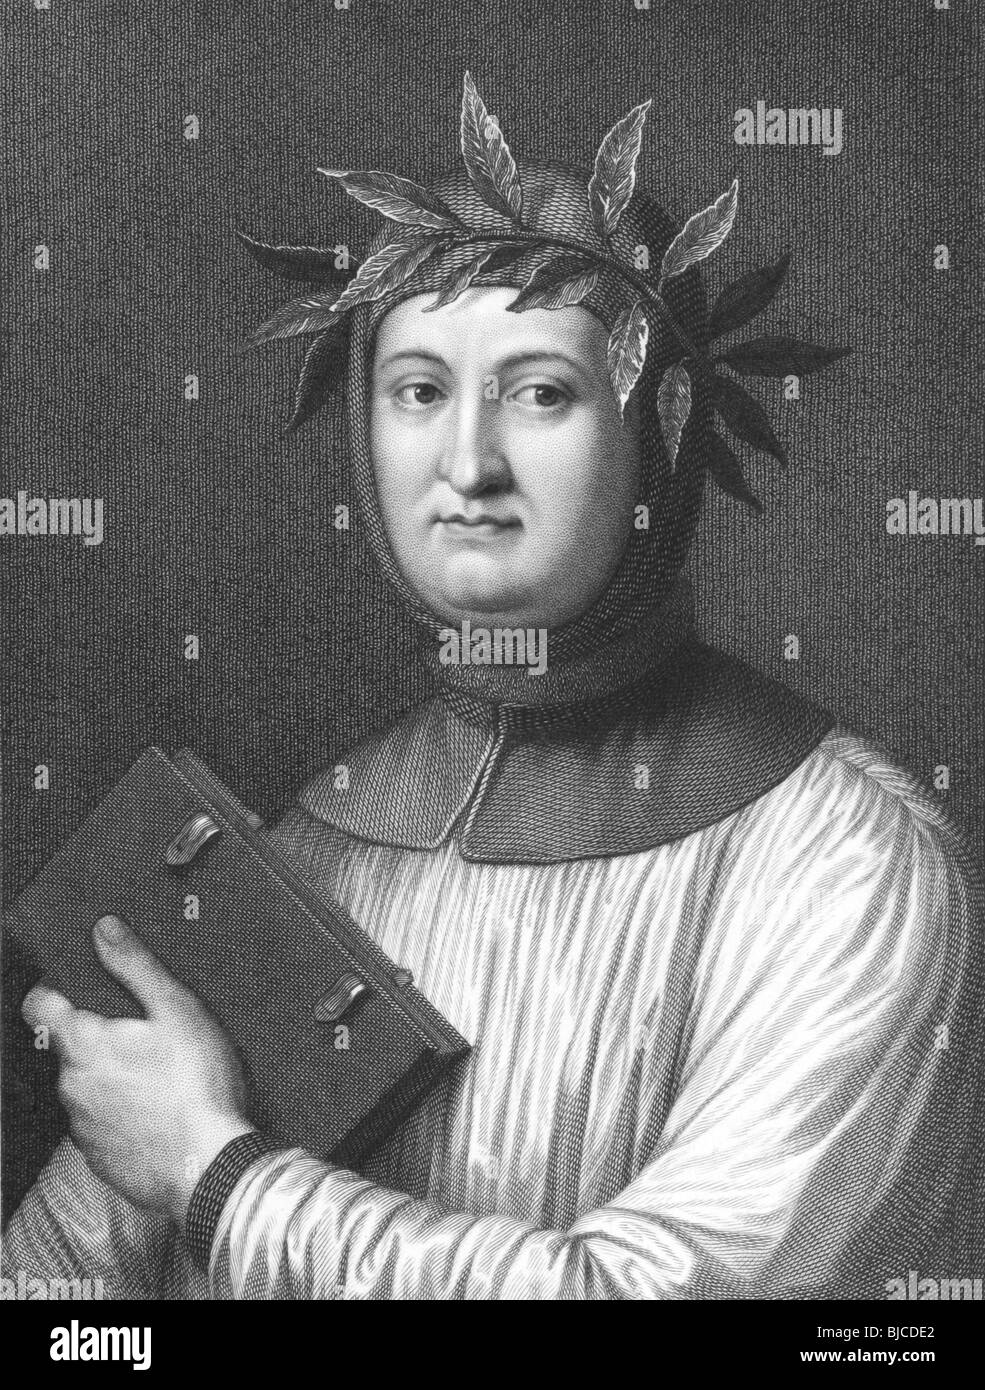 Francesco Petrarch aka Petrarch (1304-1374) on engraving from the 1800s. Italian scholar, poet and humanist. Stock Photo